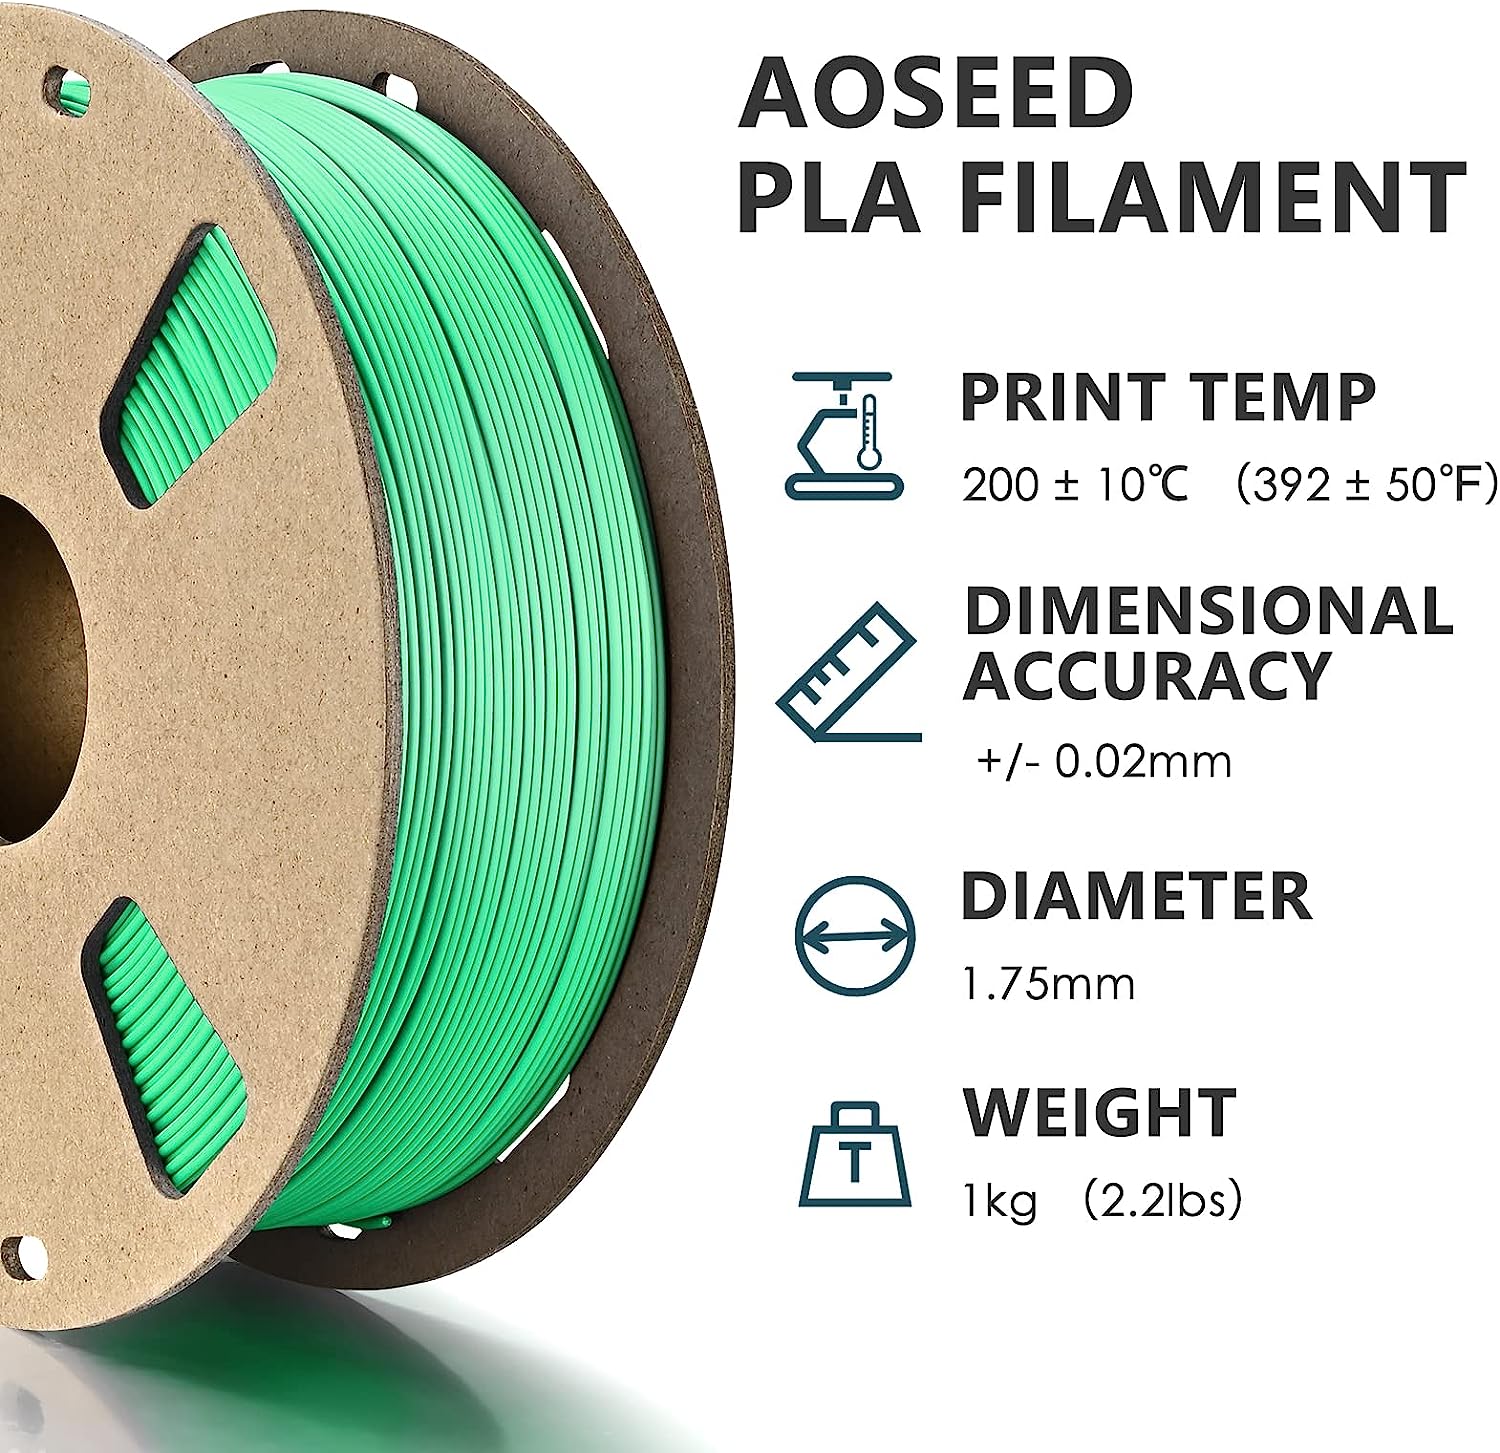 AOSEED PLA Filament 1.75mm for X-MAKER